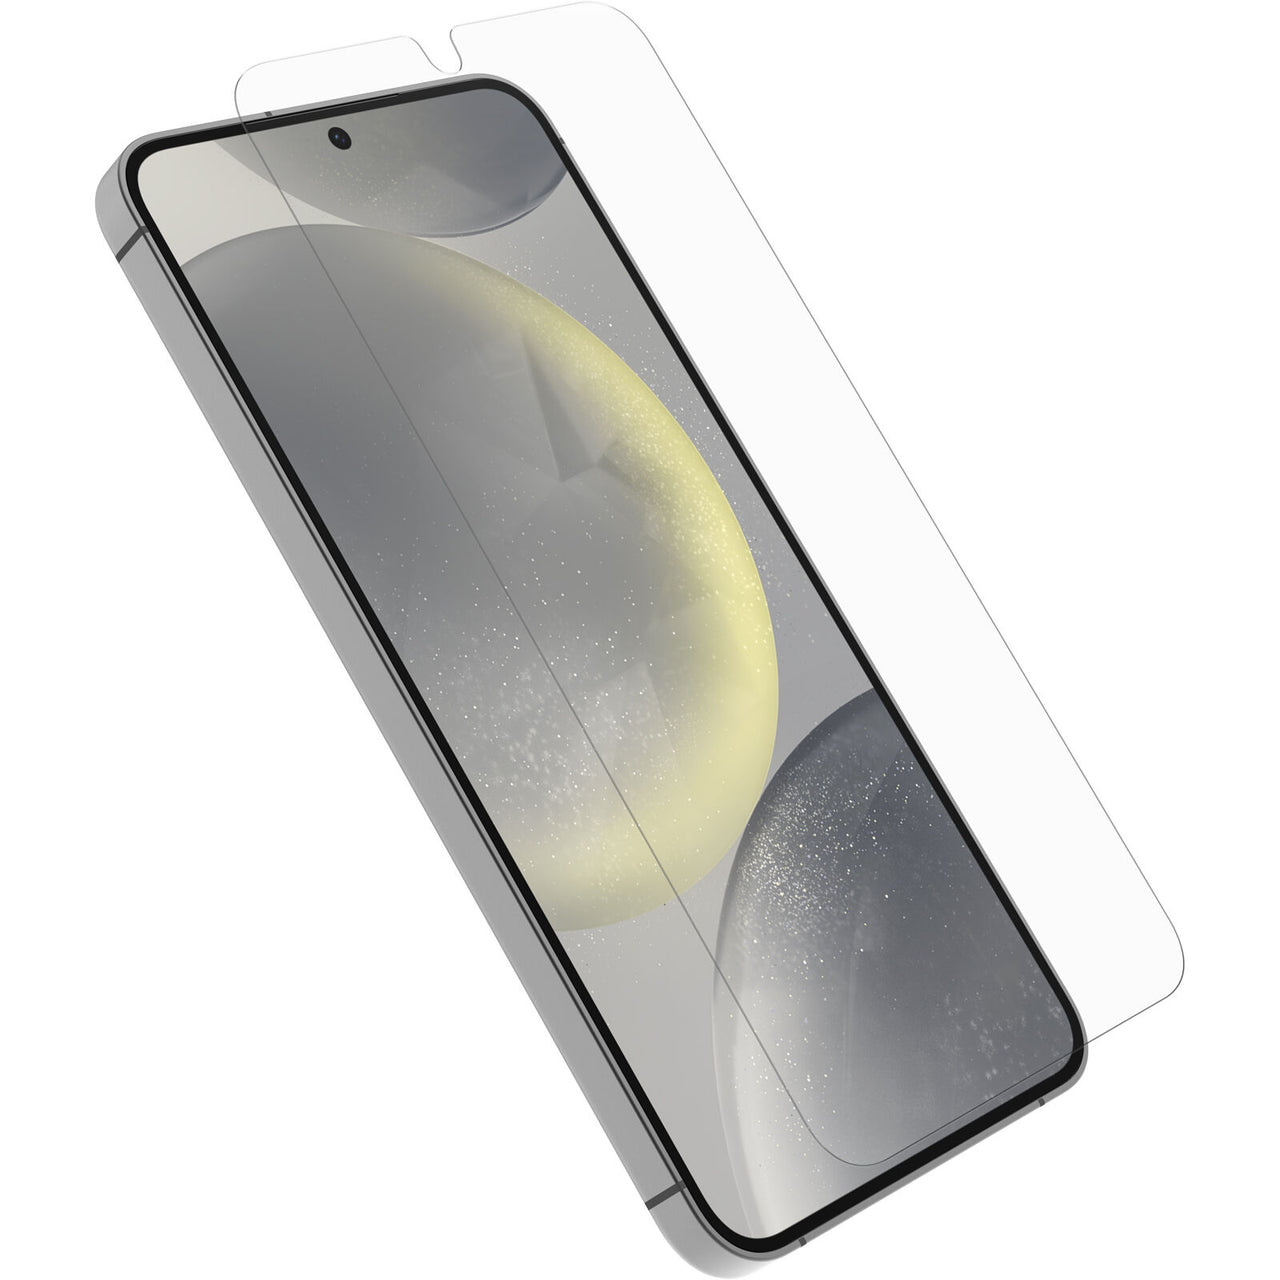 Otterbox PolyArmor Eco Screen Protector For Samsung Galaxy S24+  - Clear